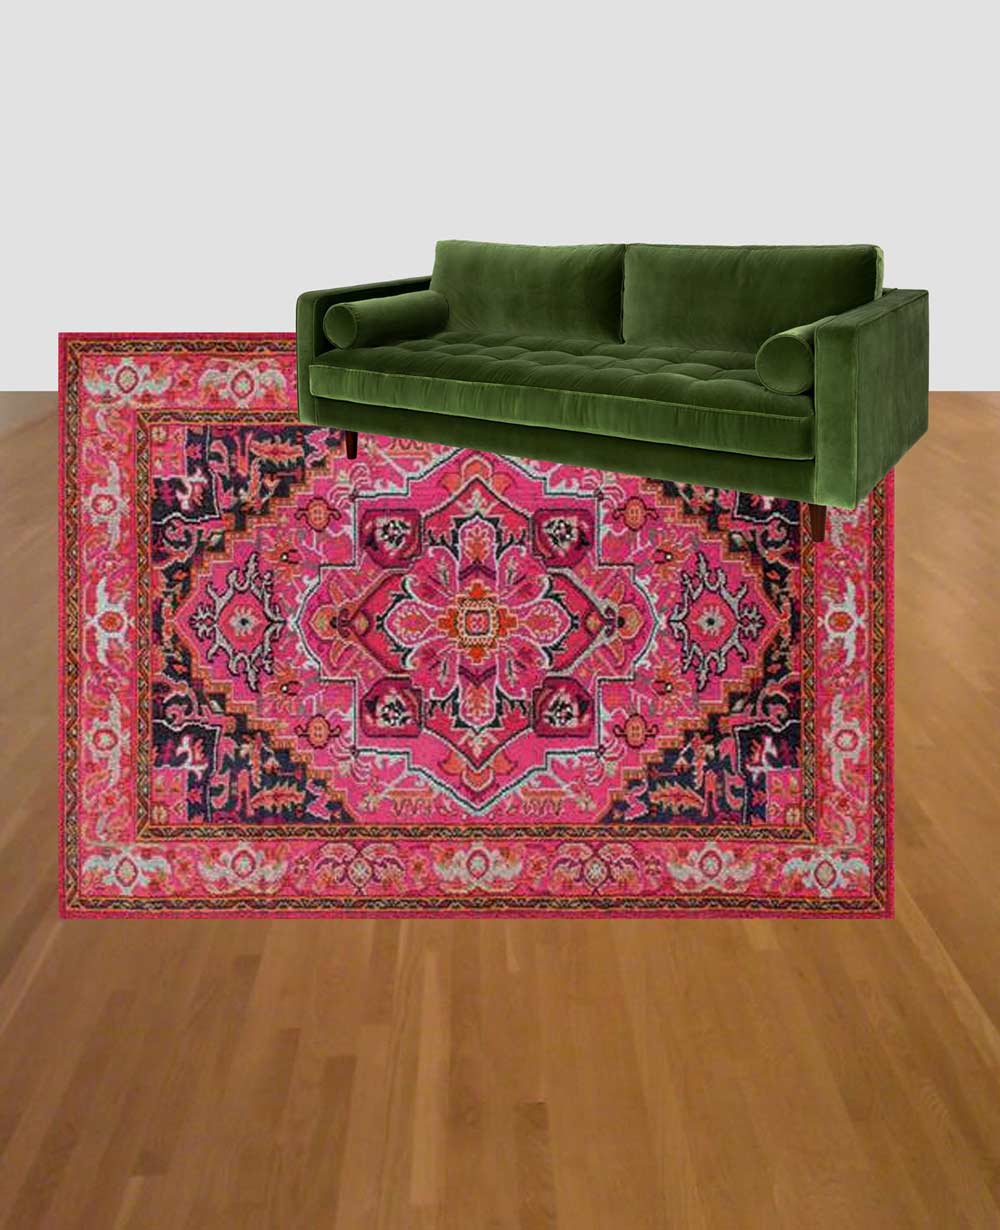 Green couch and pink rug combo: Article Sven Grass Green Velvet couch with Rugs USA Chroma Center Medallion mockup